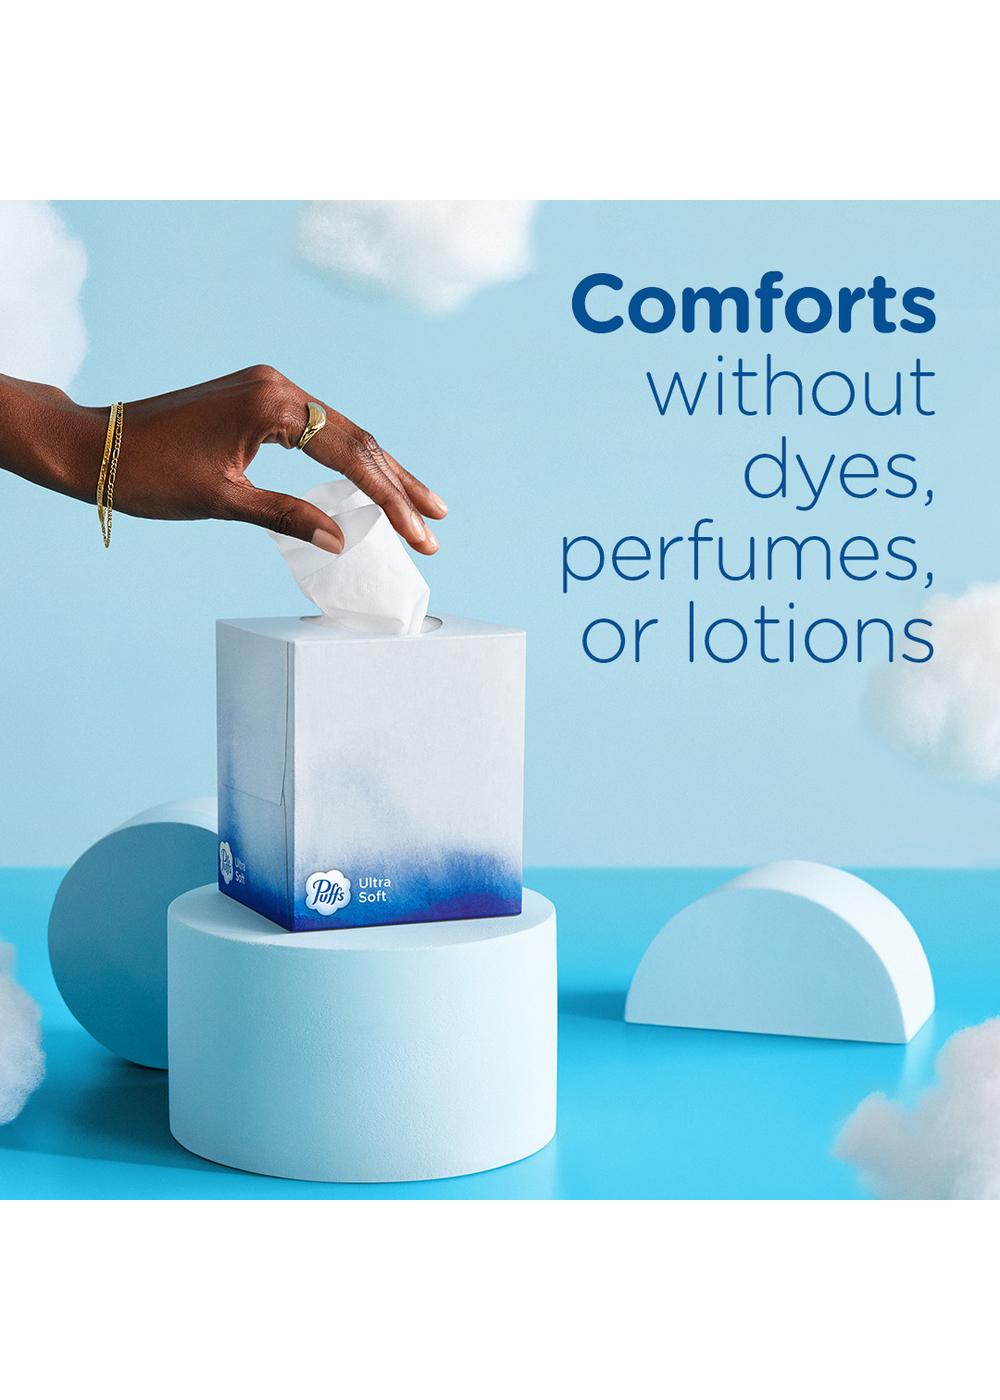 Puffs Ultra Soft Facial Tissues; image 2 of 10